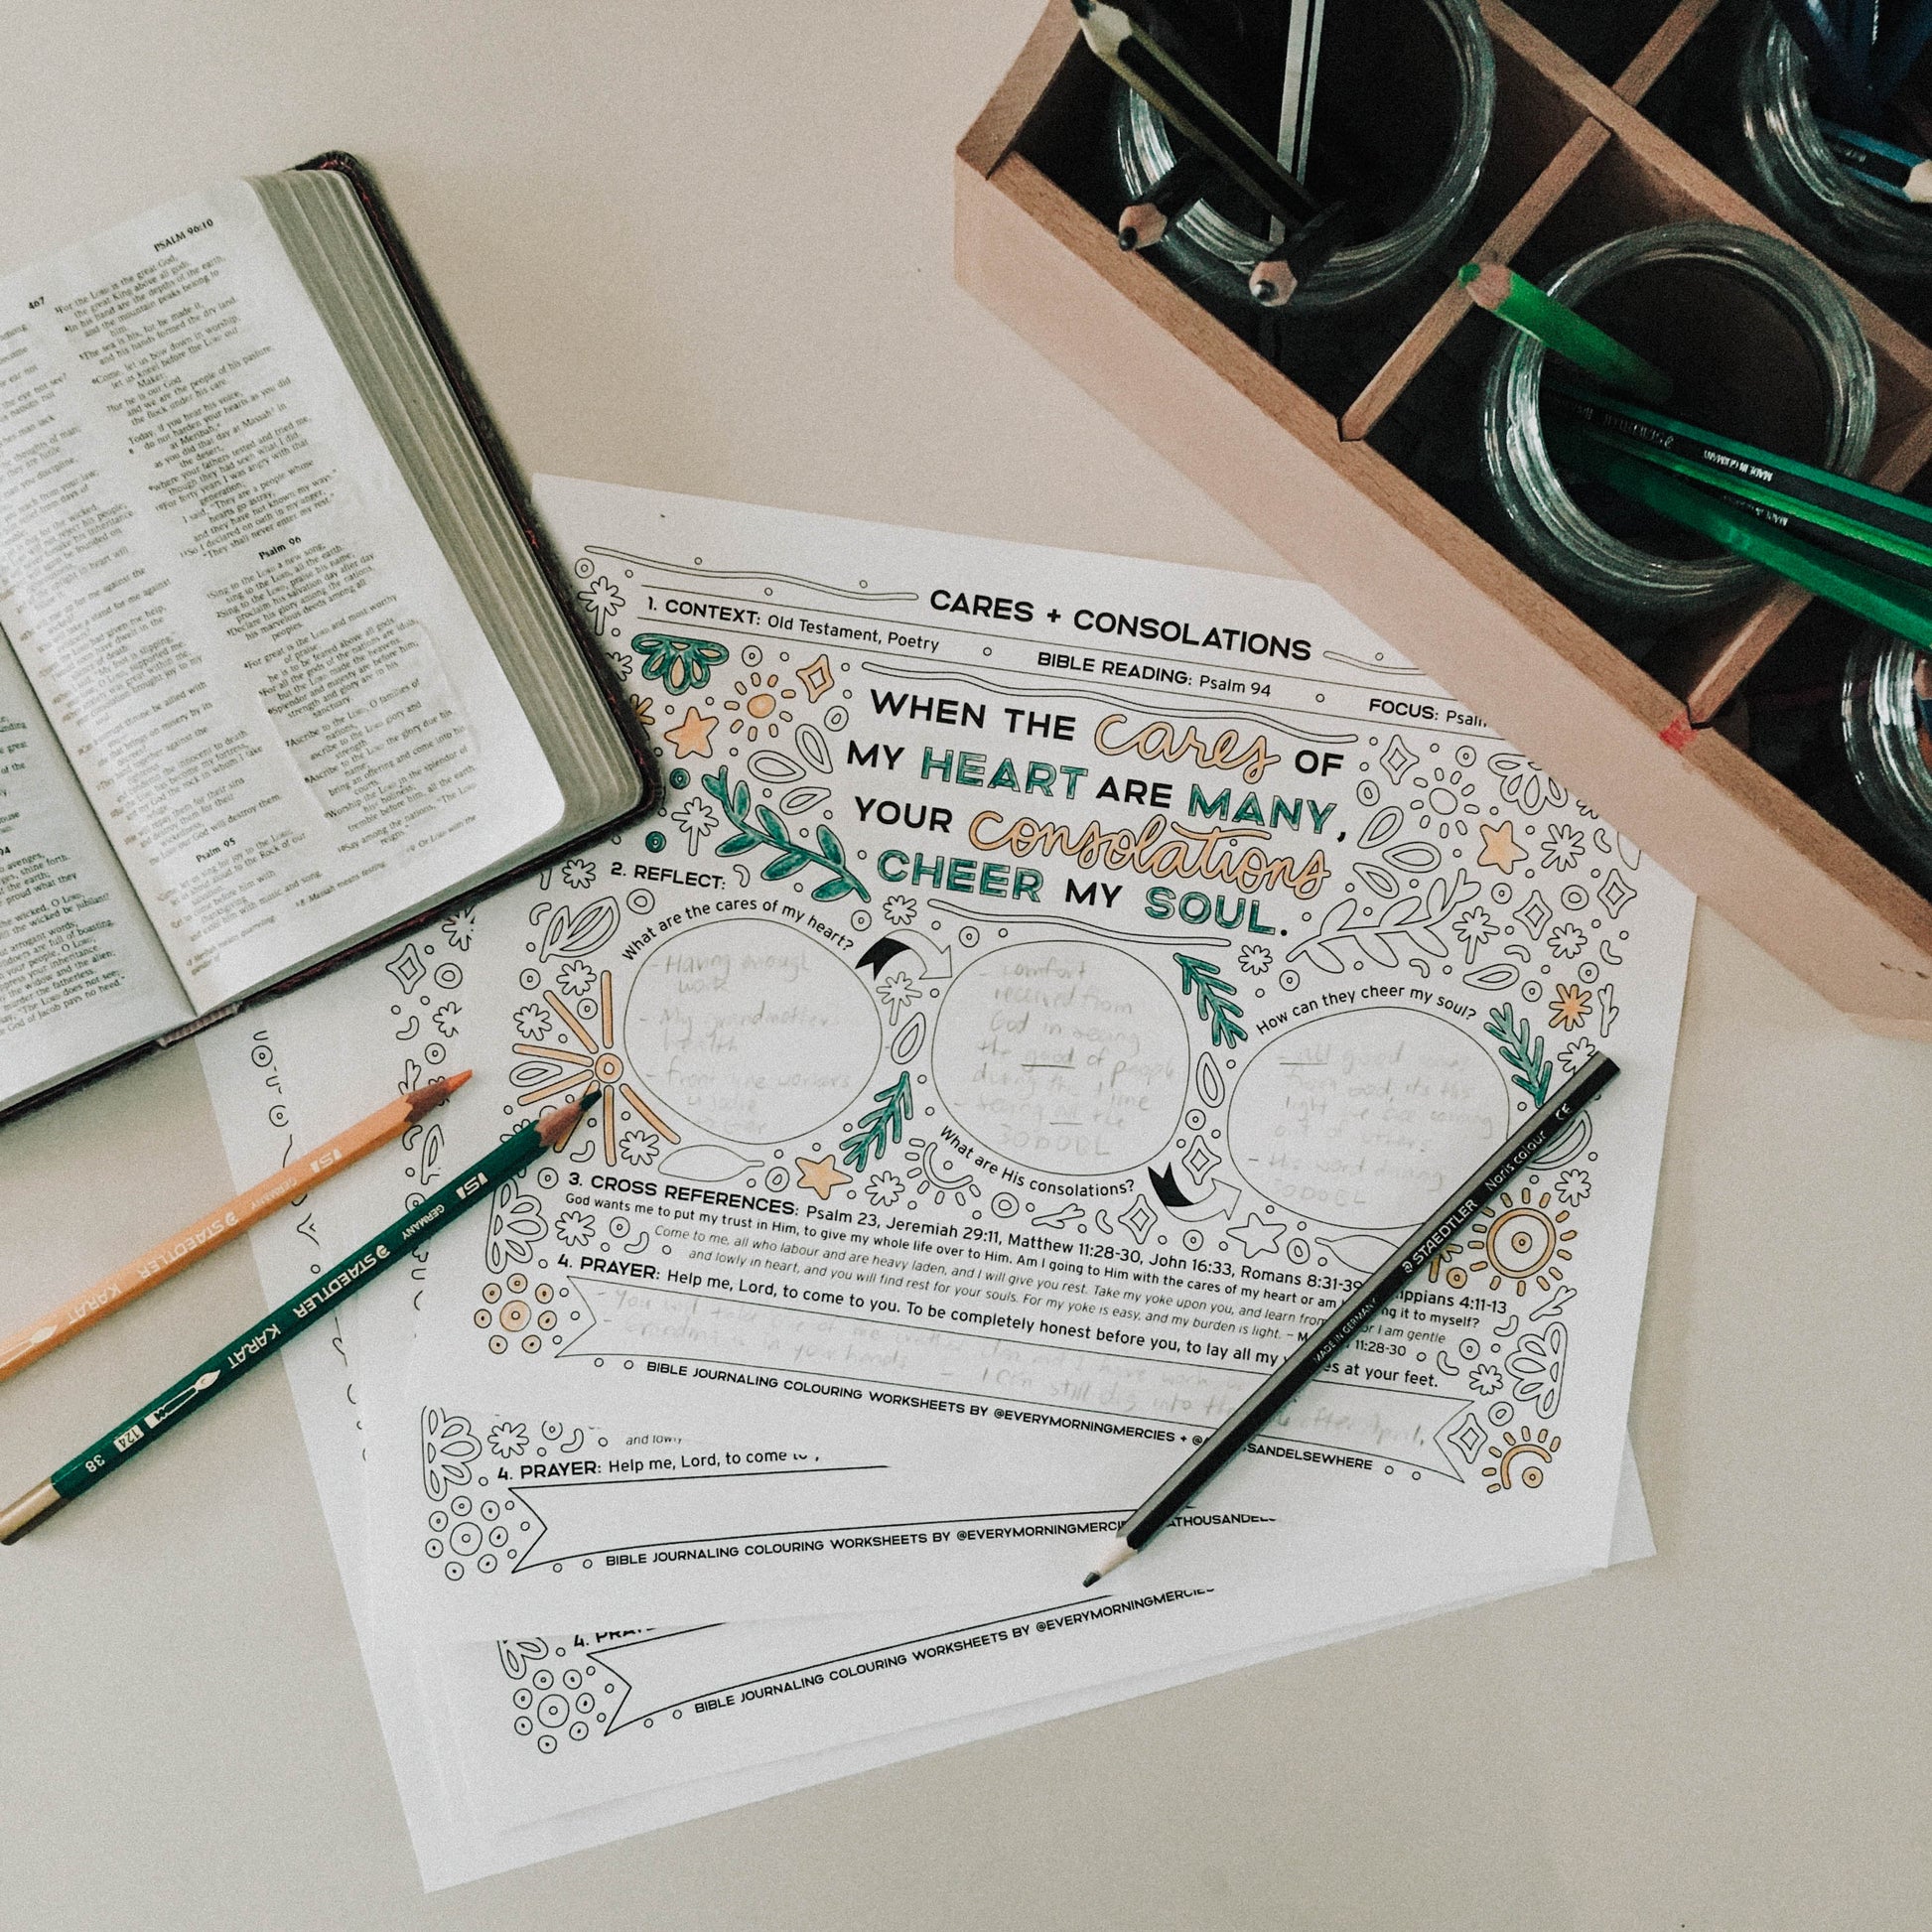 Bible Journaling Colouring Worksheets - Saved to Serve Series - A Thousand Elsewhere